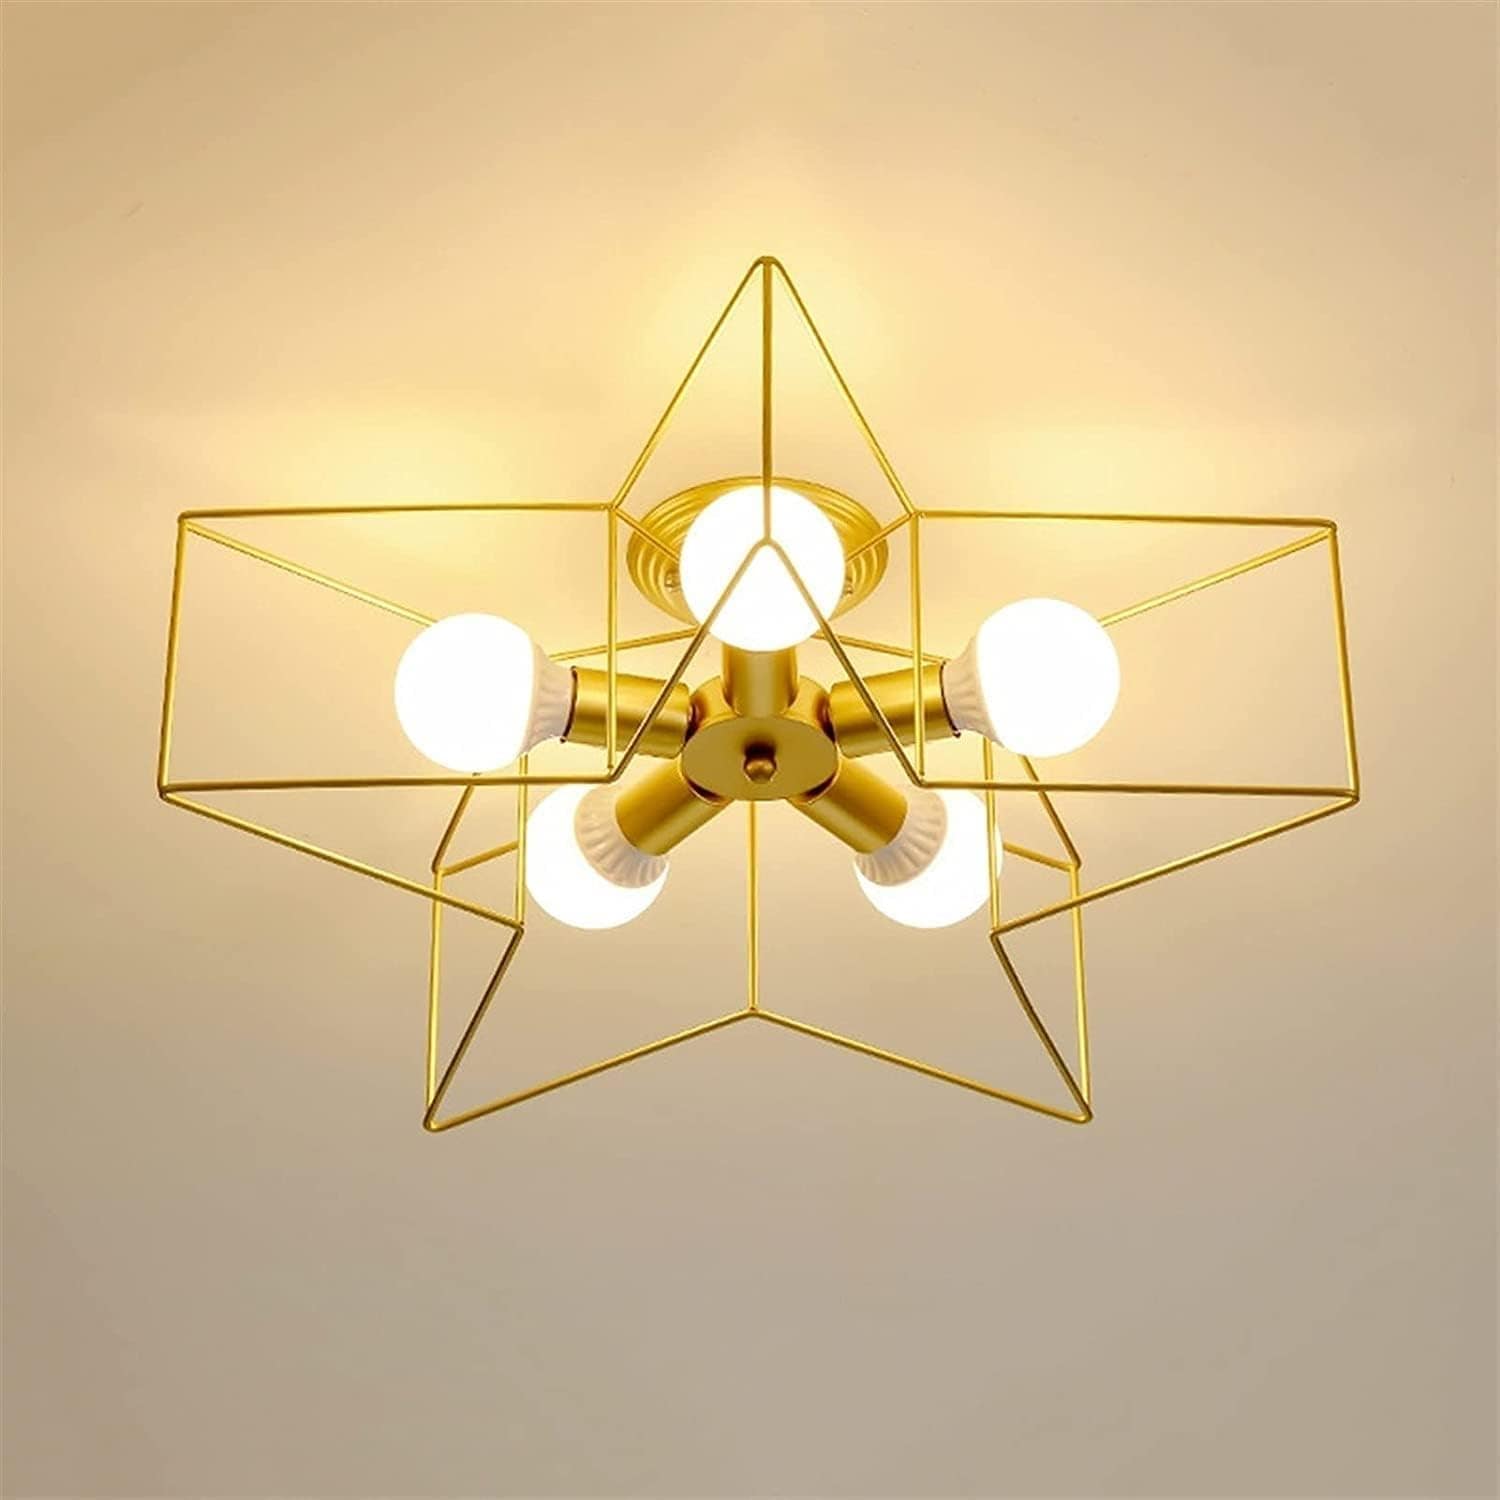 Buy Modern Golden Crystal Wall Sconces Light Fixture - CL-27 | Shop at Supply Master Accra, Ghana Lamps & Lightings Buy Tools hardware Building materials